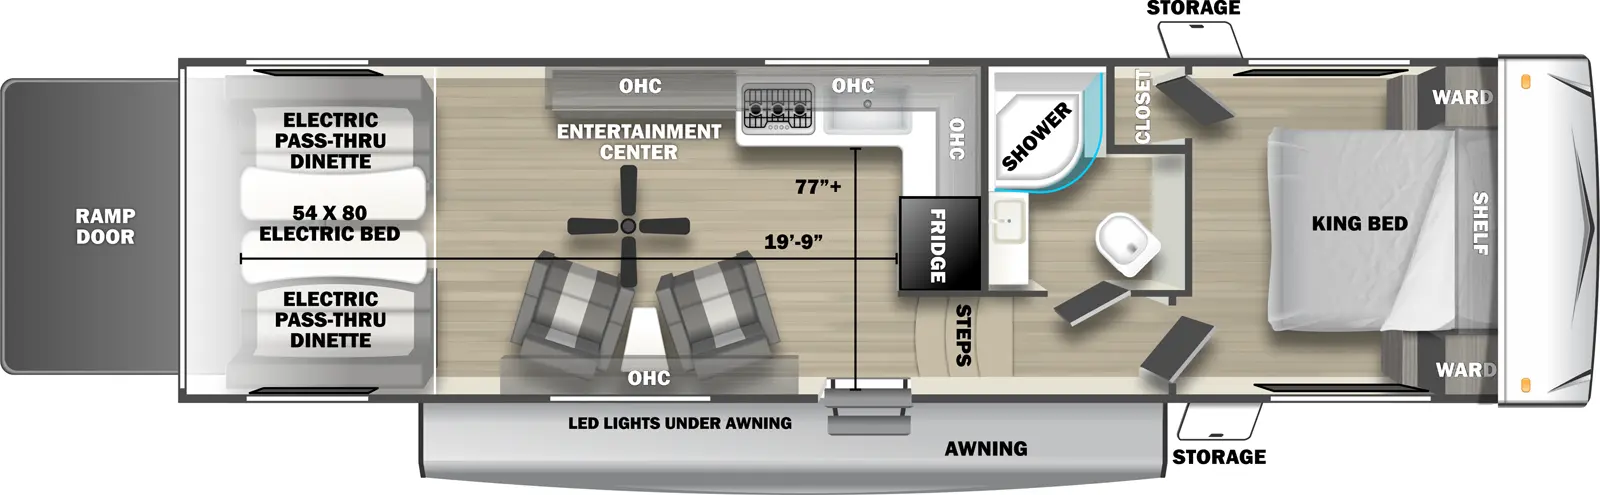 The 3210RLX has zero slideouts, one entry, and rear ramp door. Exterior features storage and awning with LED light underneath. Interior layout front to back: foot-facing king bed with shelf above, wardrobes on each side, and off-door side closet; off-door side full bathroom; steps down to main living area and entry; refrigerator and kitchen counter with overhead cabinet wrap from inner wall to off-door side with sink, cooktop and entertainment center; door side chairs with end table, overhead cabinet, and paddle fan; rear opposing electric pass-thru dinettes with electric bed above. Garage dimensions: 19 foot 9 inches from rear to kitchen counter; 77" from door side to kitchen counter.